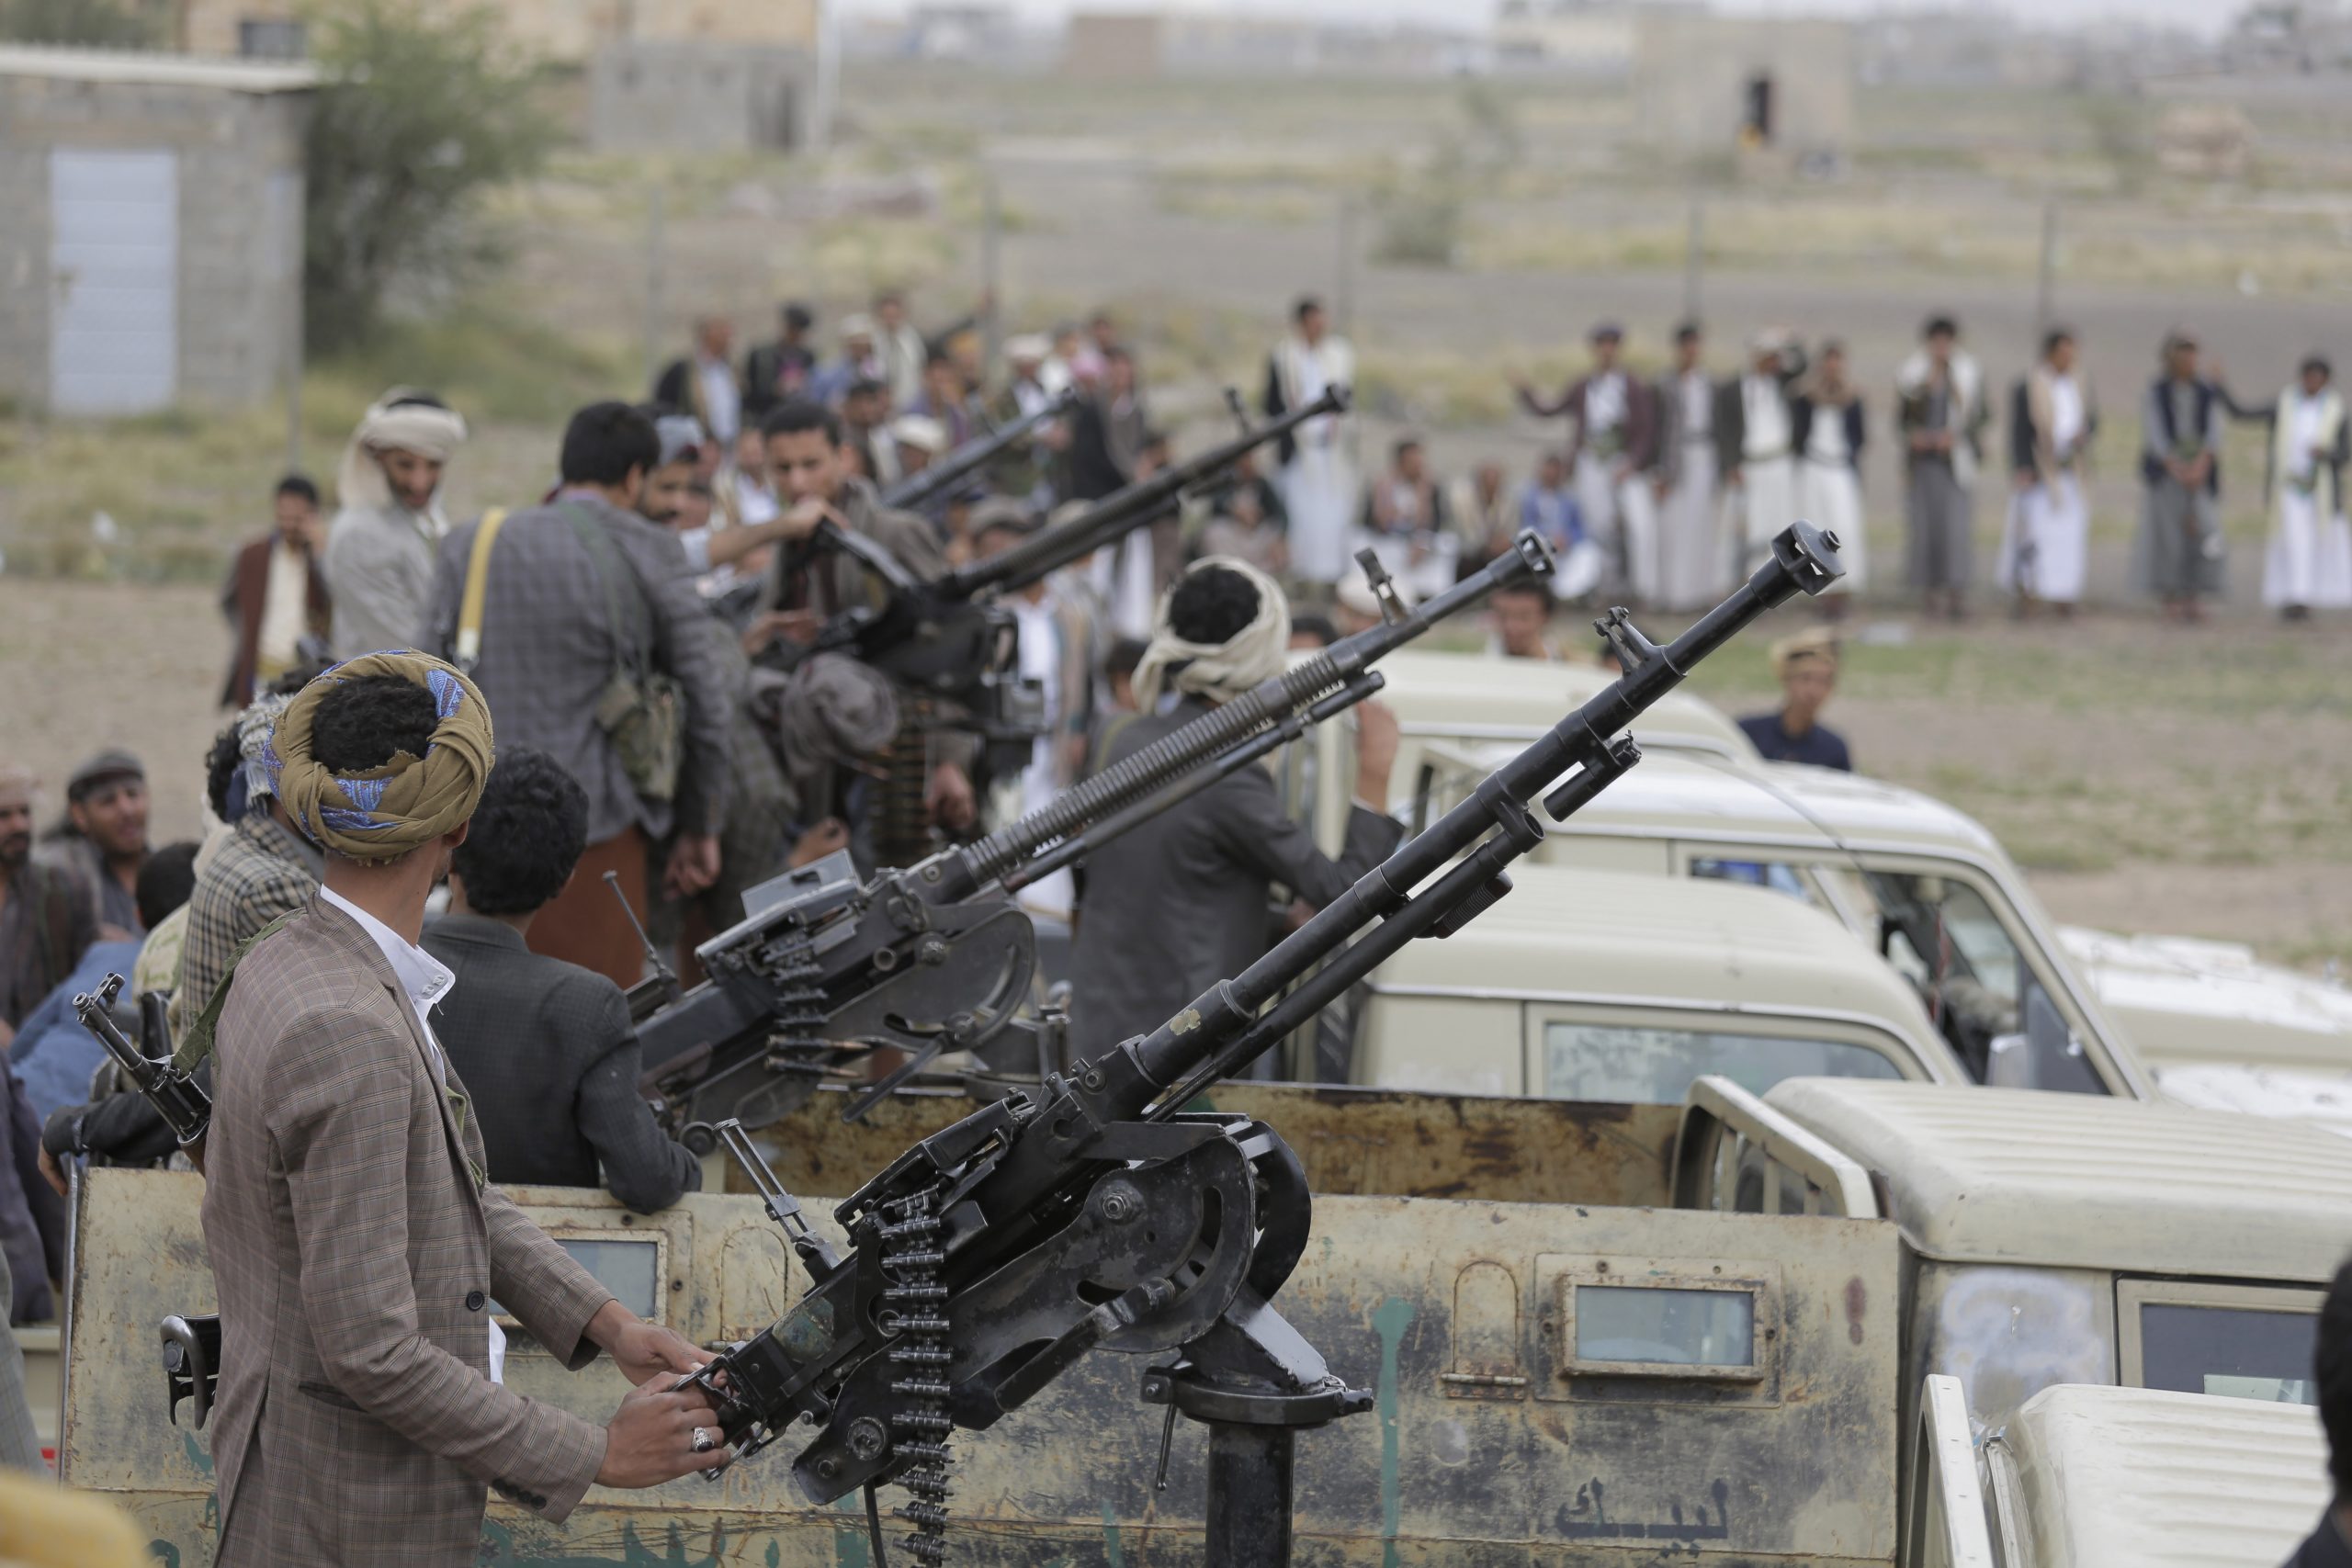 Houthis sustaining material, human losses as Yemeni army moves ahead with liberating Yemen